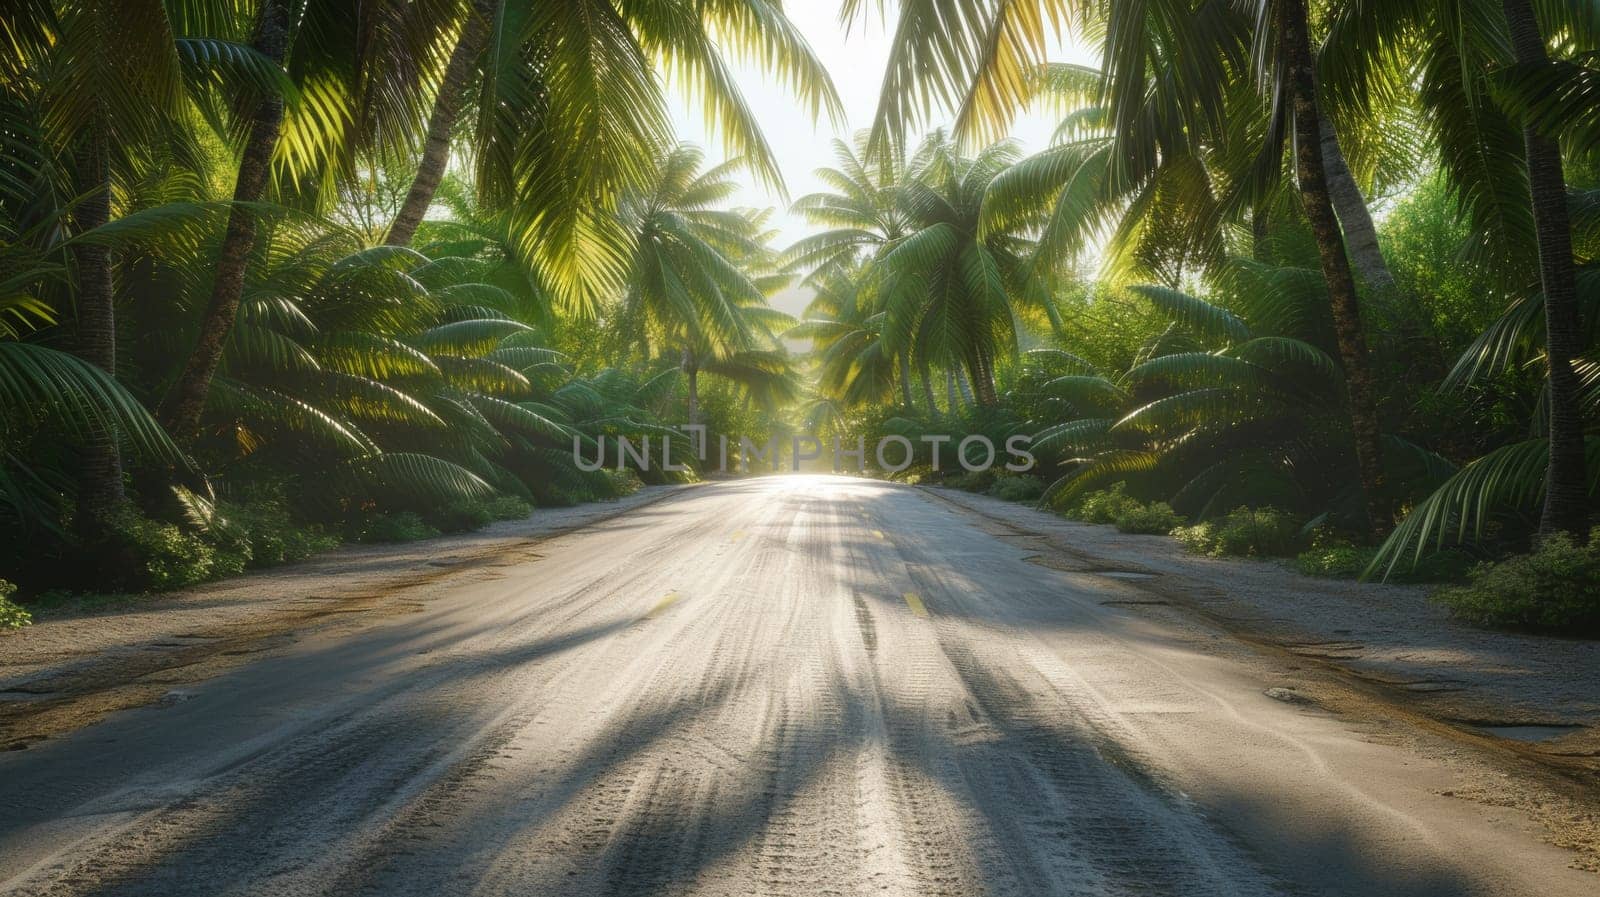 A road with palm trees in the background and sun shining